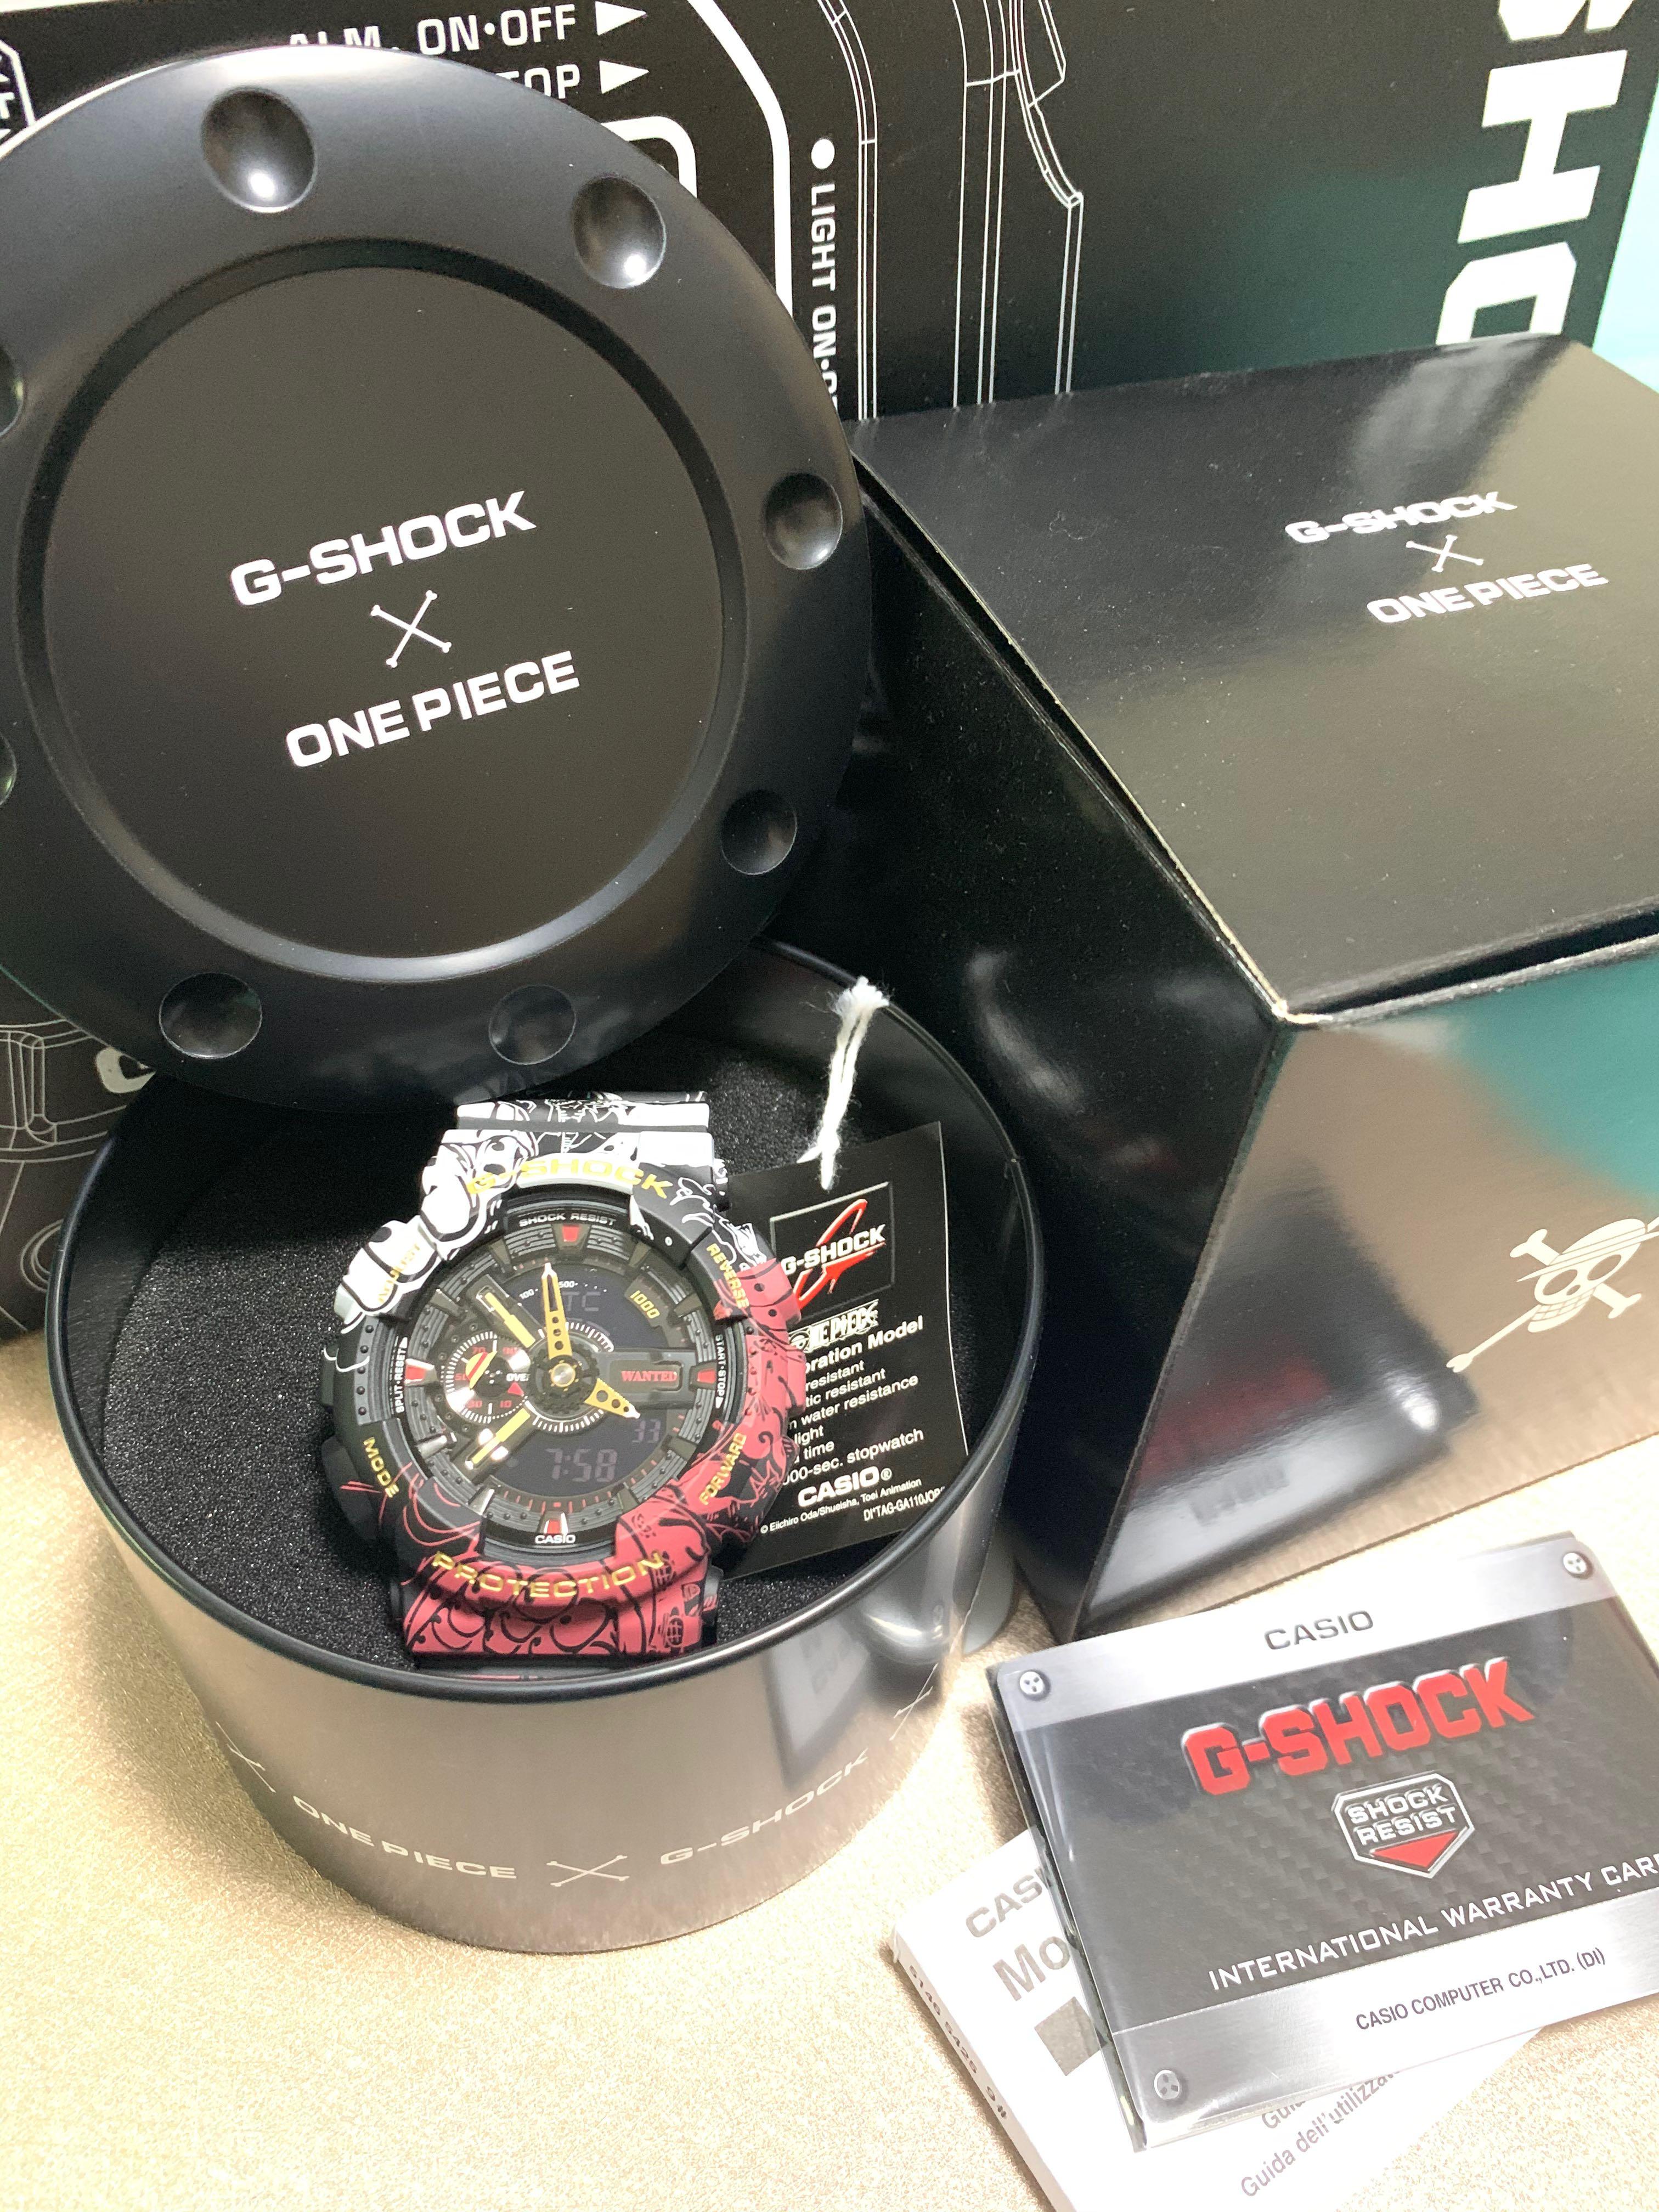 G Shock X One Piece Limited Edition Ga 110jop 1a4dr Men S Fashion Watches On Carousell